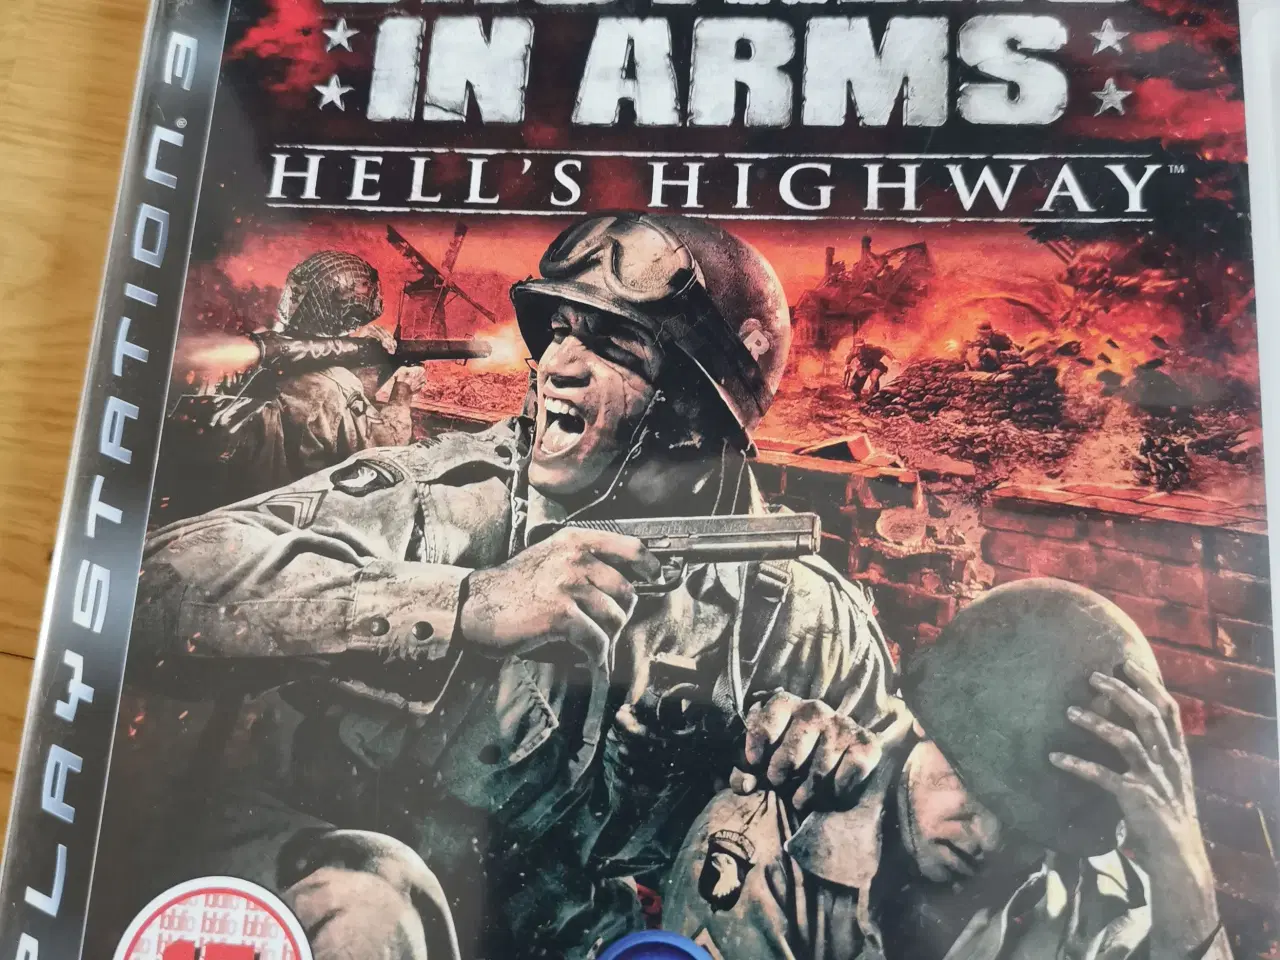 Billede 1 - Brothers in arms, hells high way 